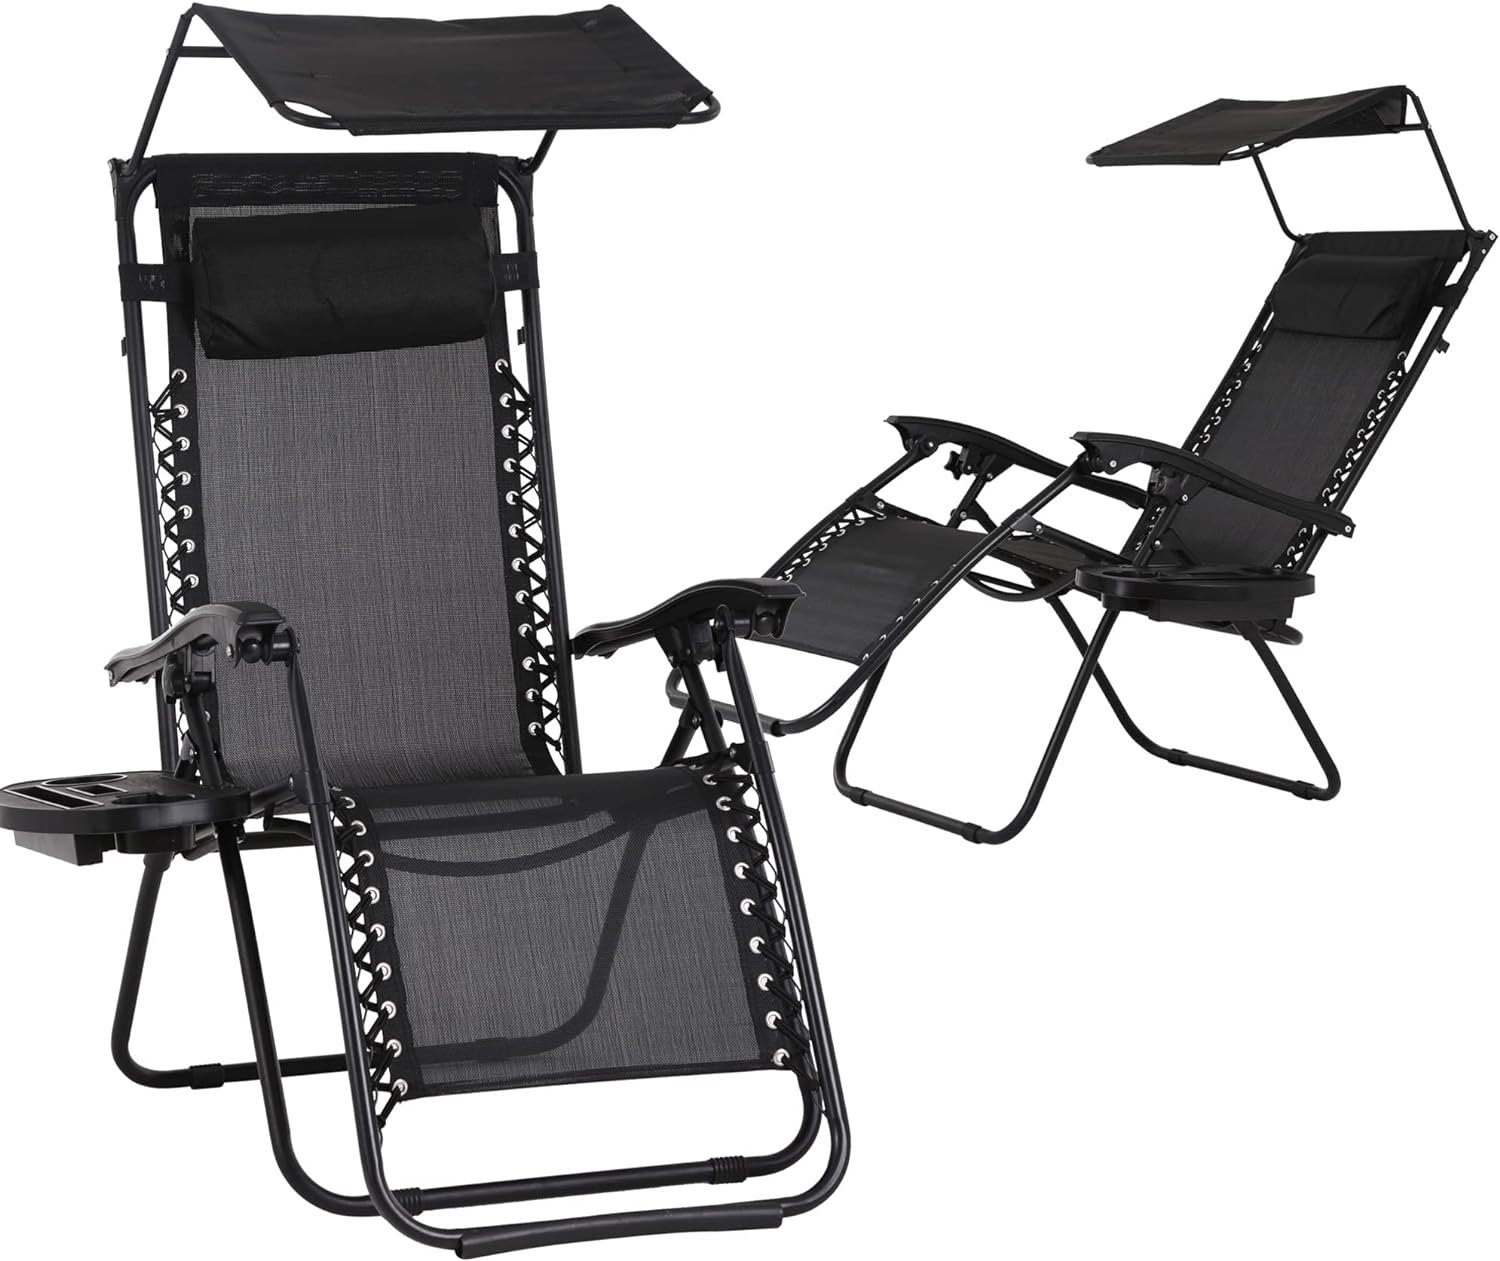 FDW 2 PCS Zero Gravity Chair Lounge Chairs Patio Chairs with Canopy Cup Holder for Outdoor Patio Seaside (Black)